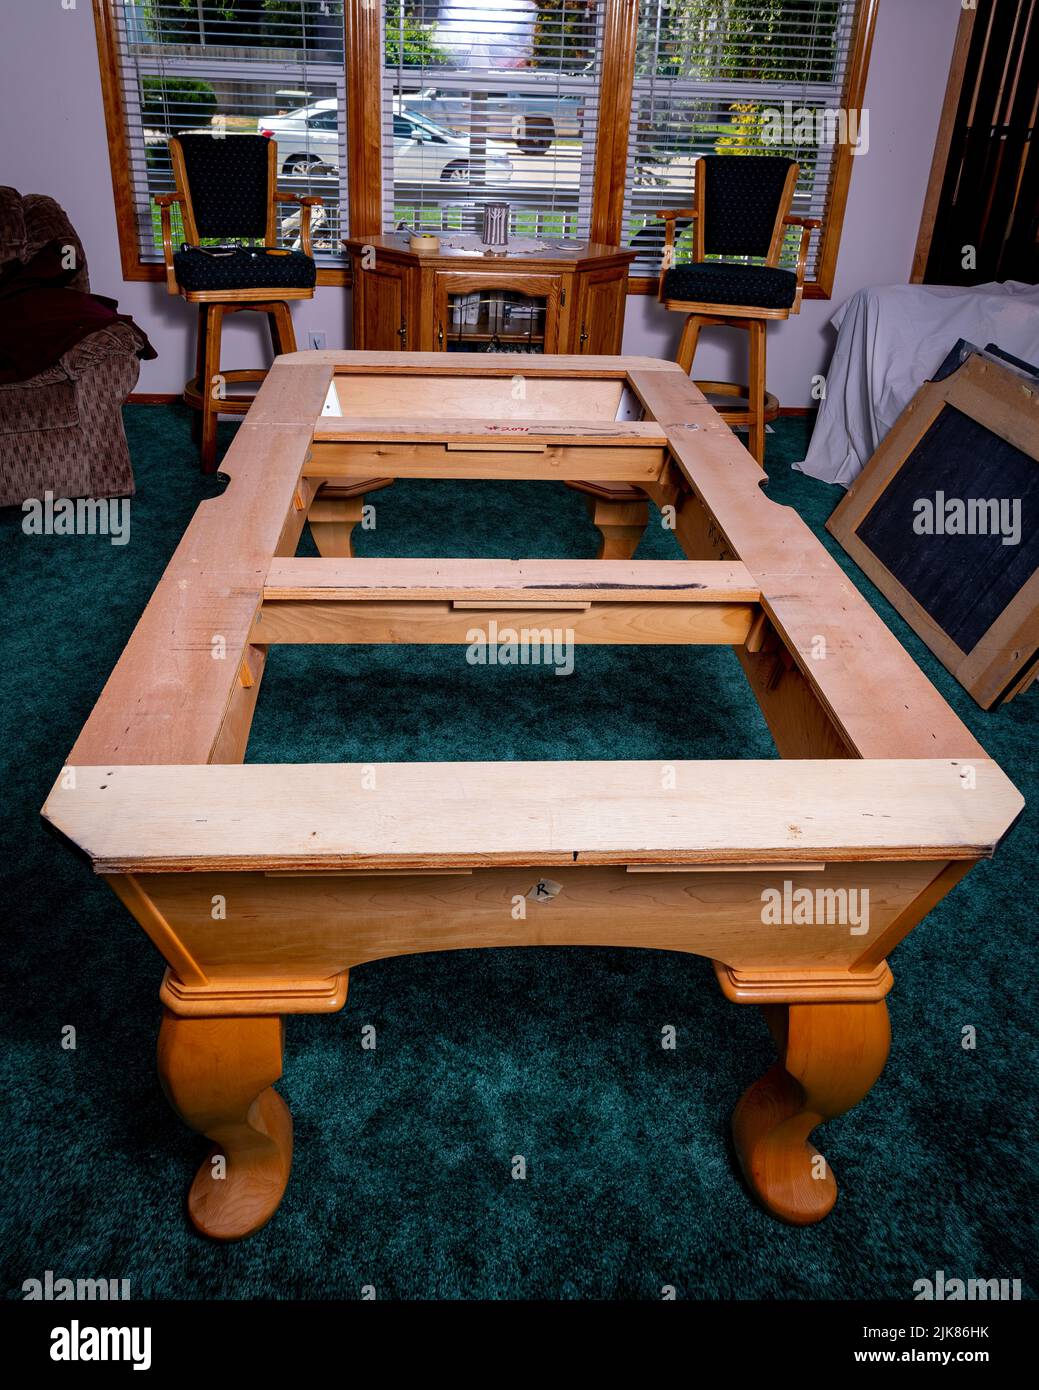 Indoor stripped pool table with maple wood frame Stock Photo